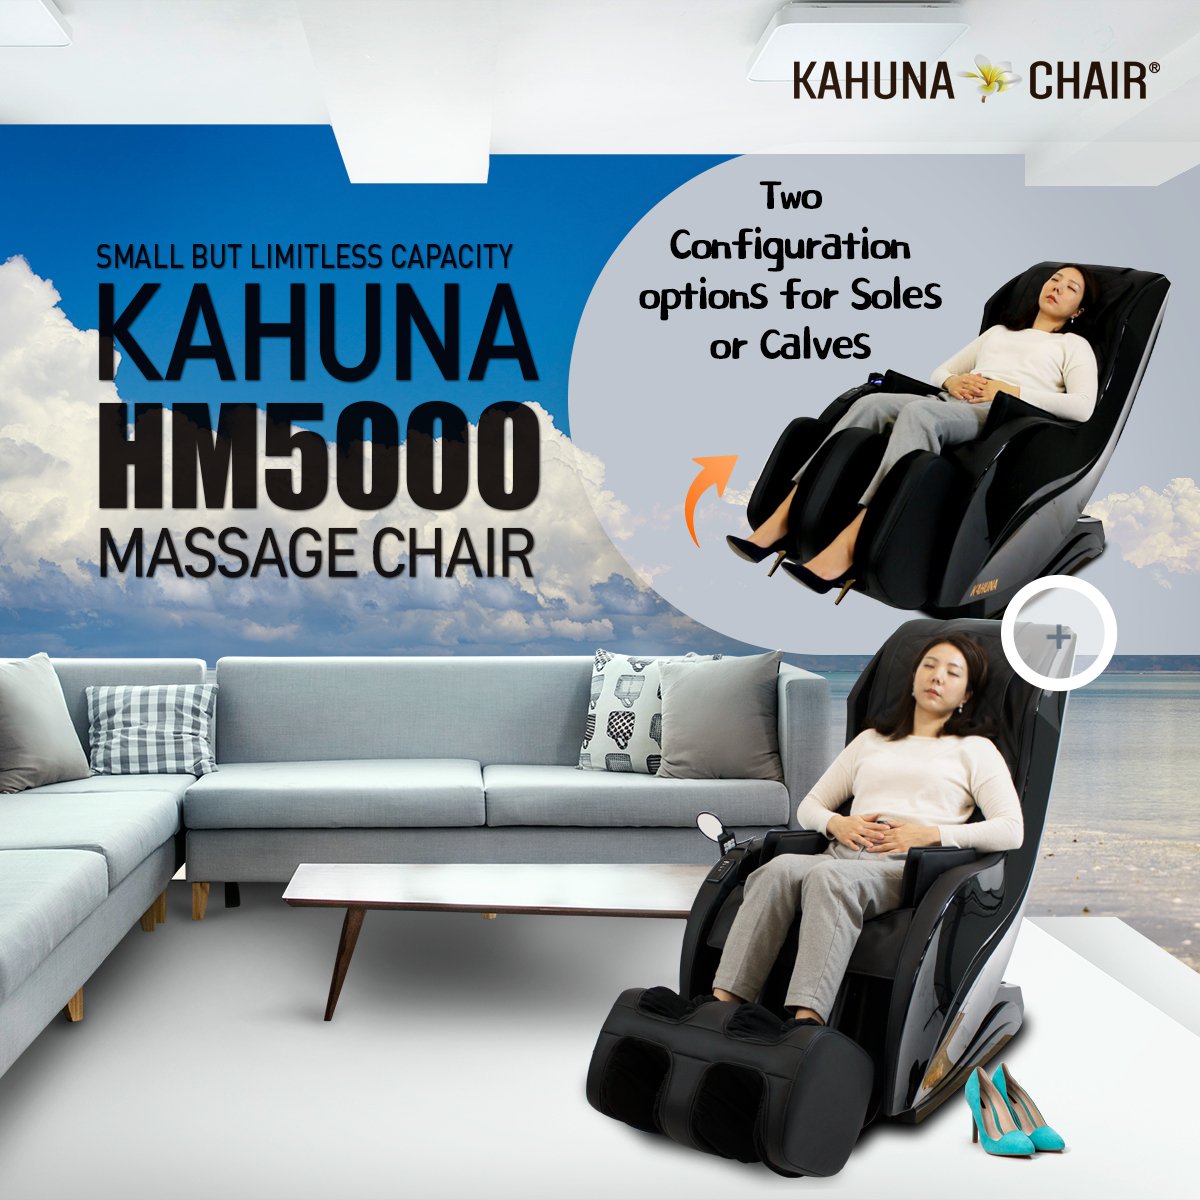 Kahuna Limitless Slender Two Configuration Soles and Calves Massage Chair